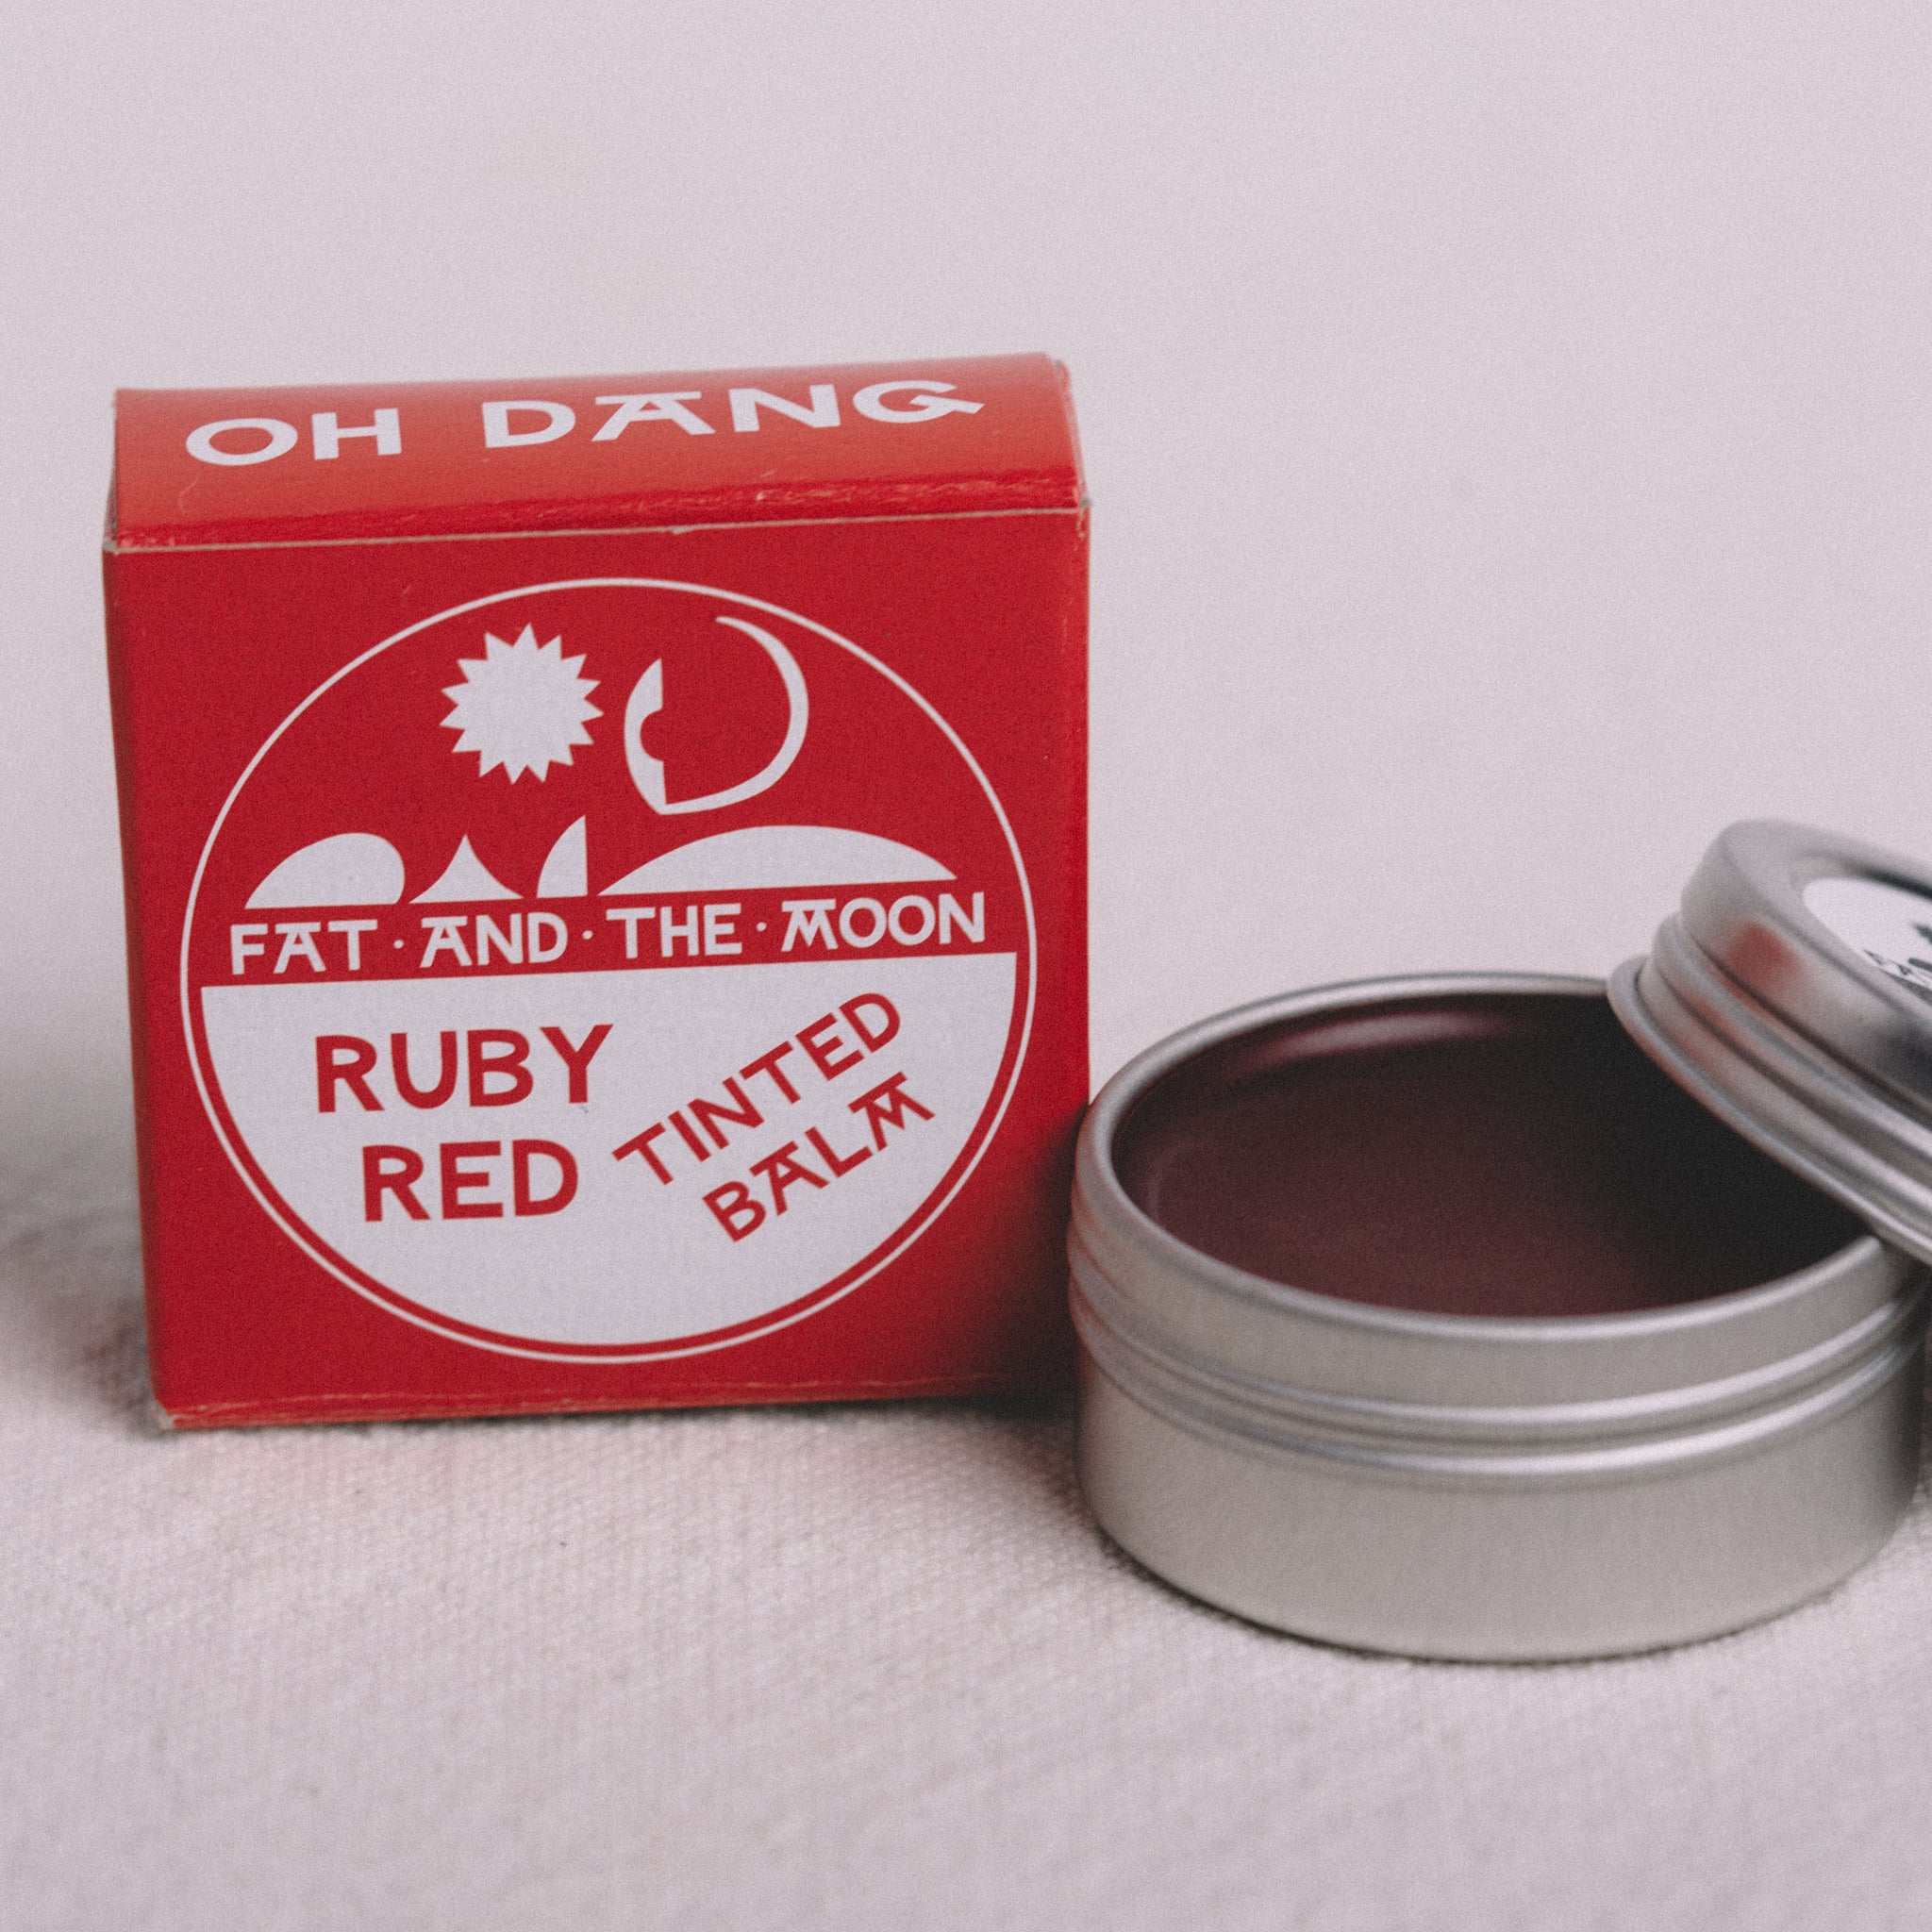 RUBY RED BALM || FAT AND THE MOON